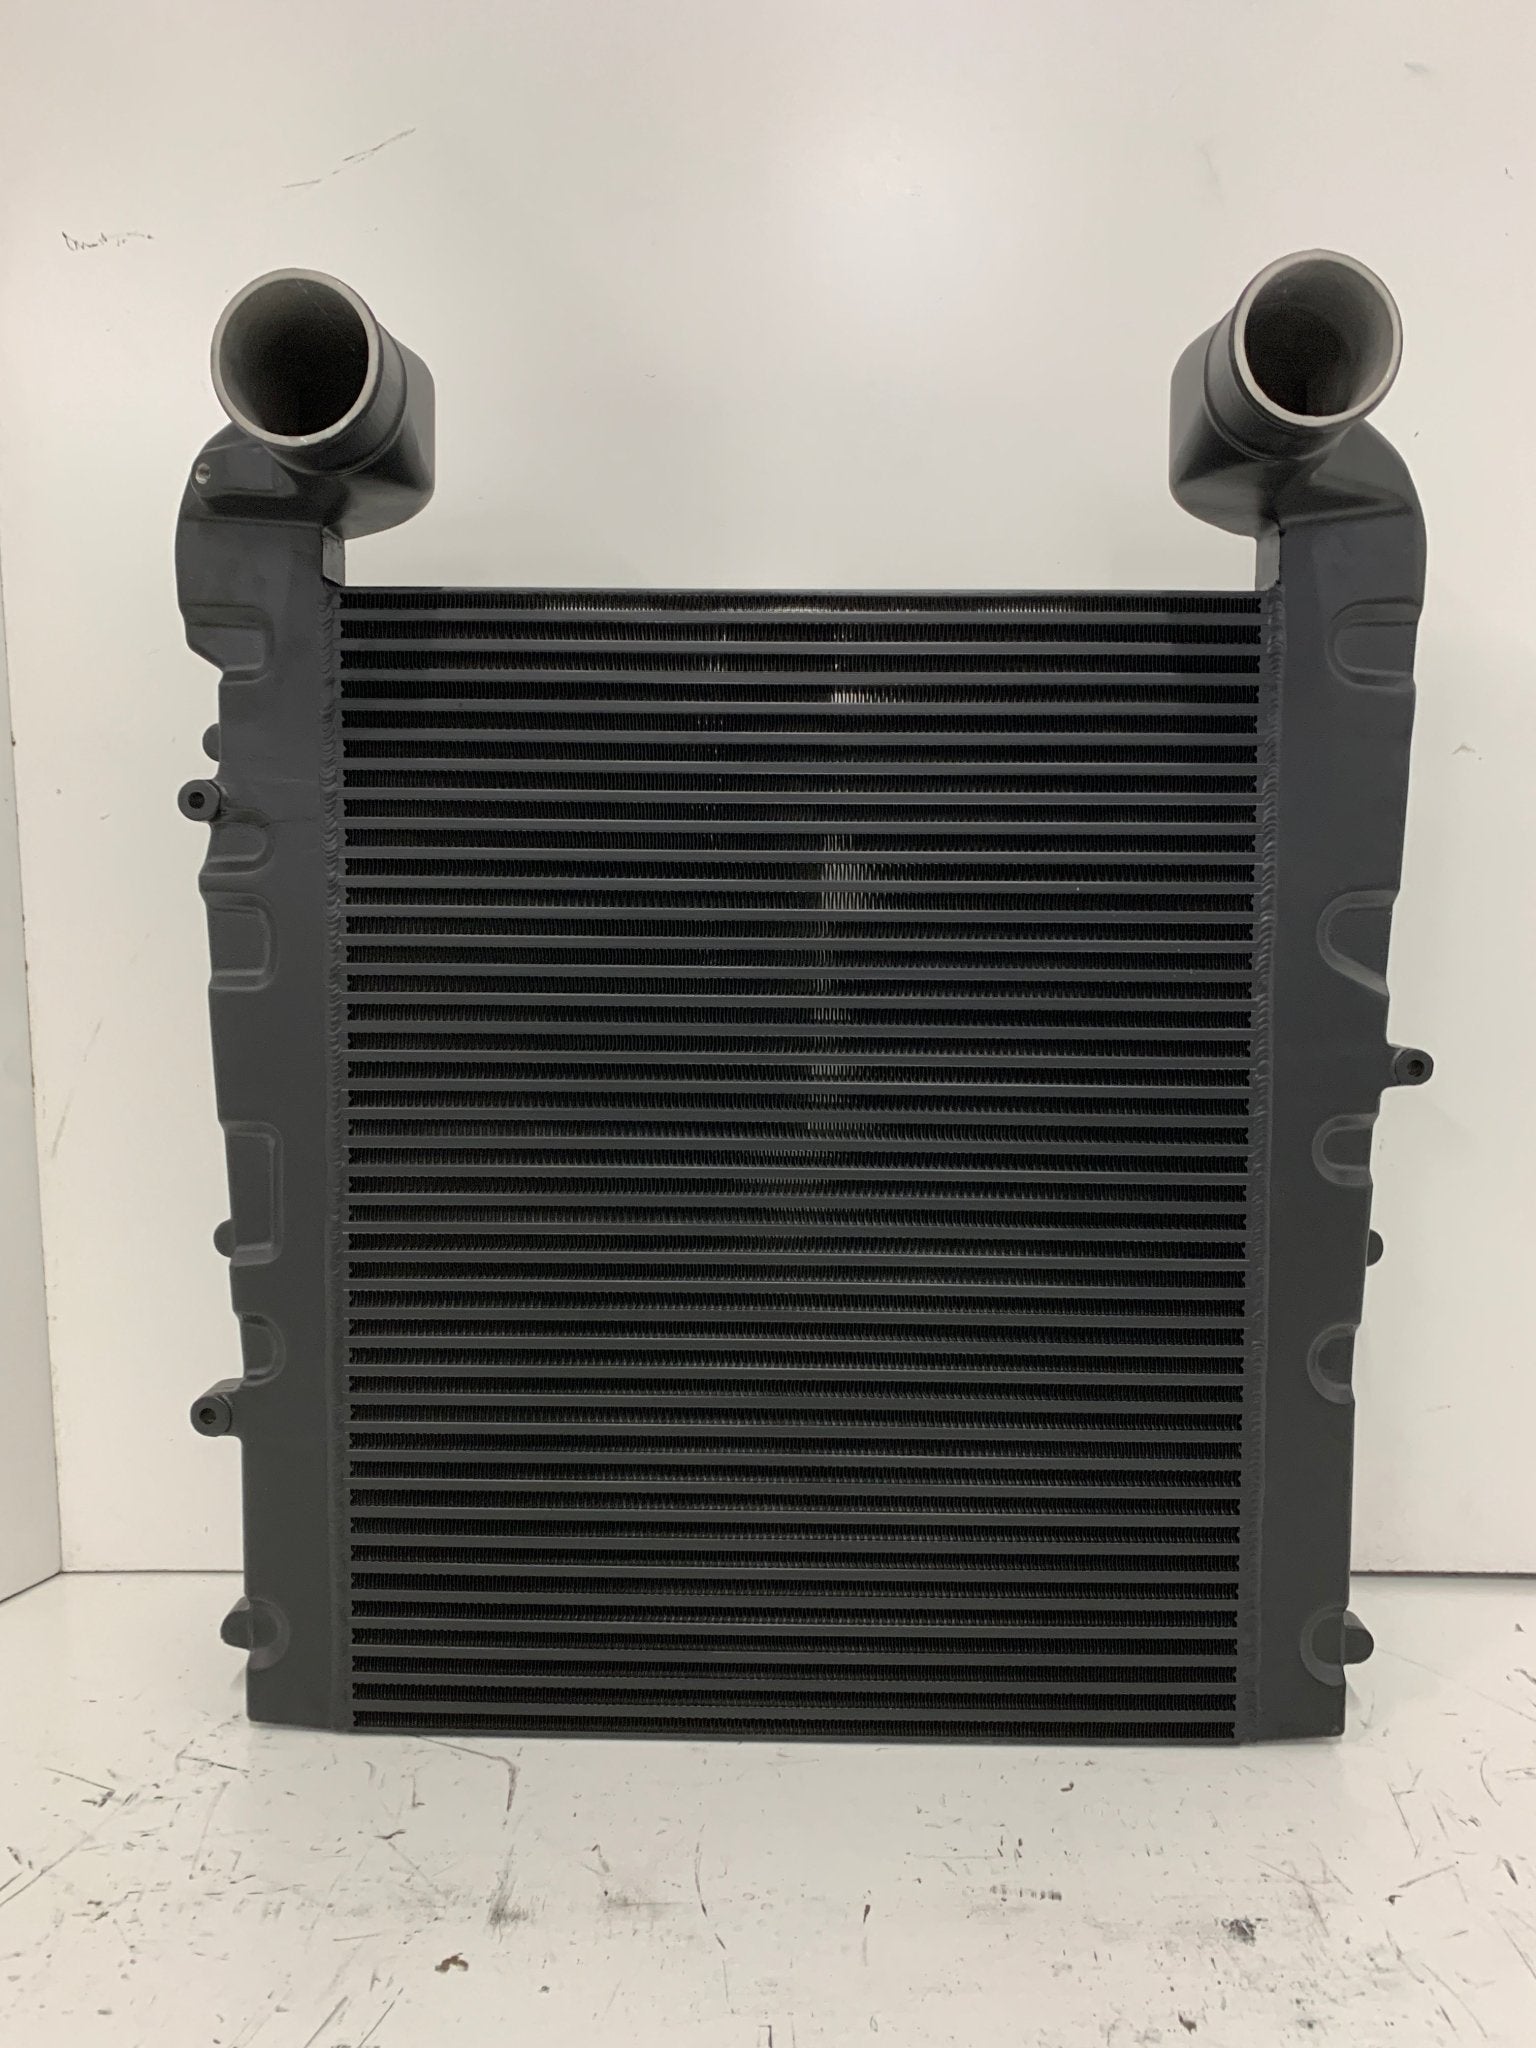 International Charge Air Cooler # 603272 - Radiator Supply House